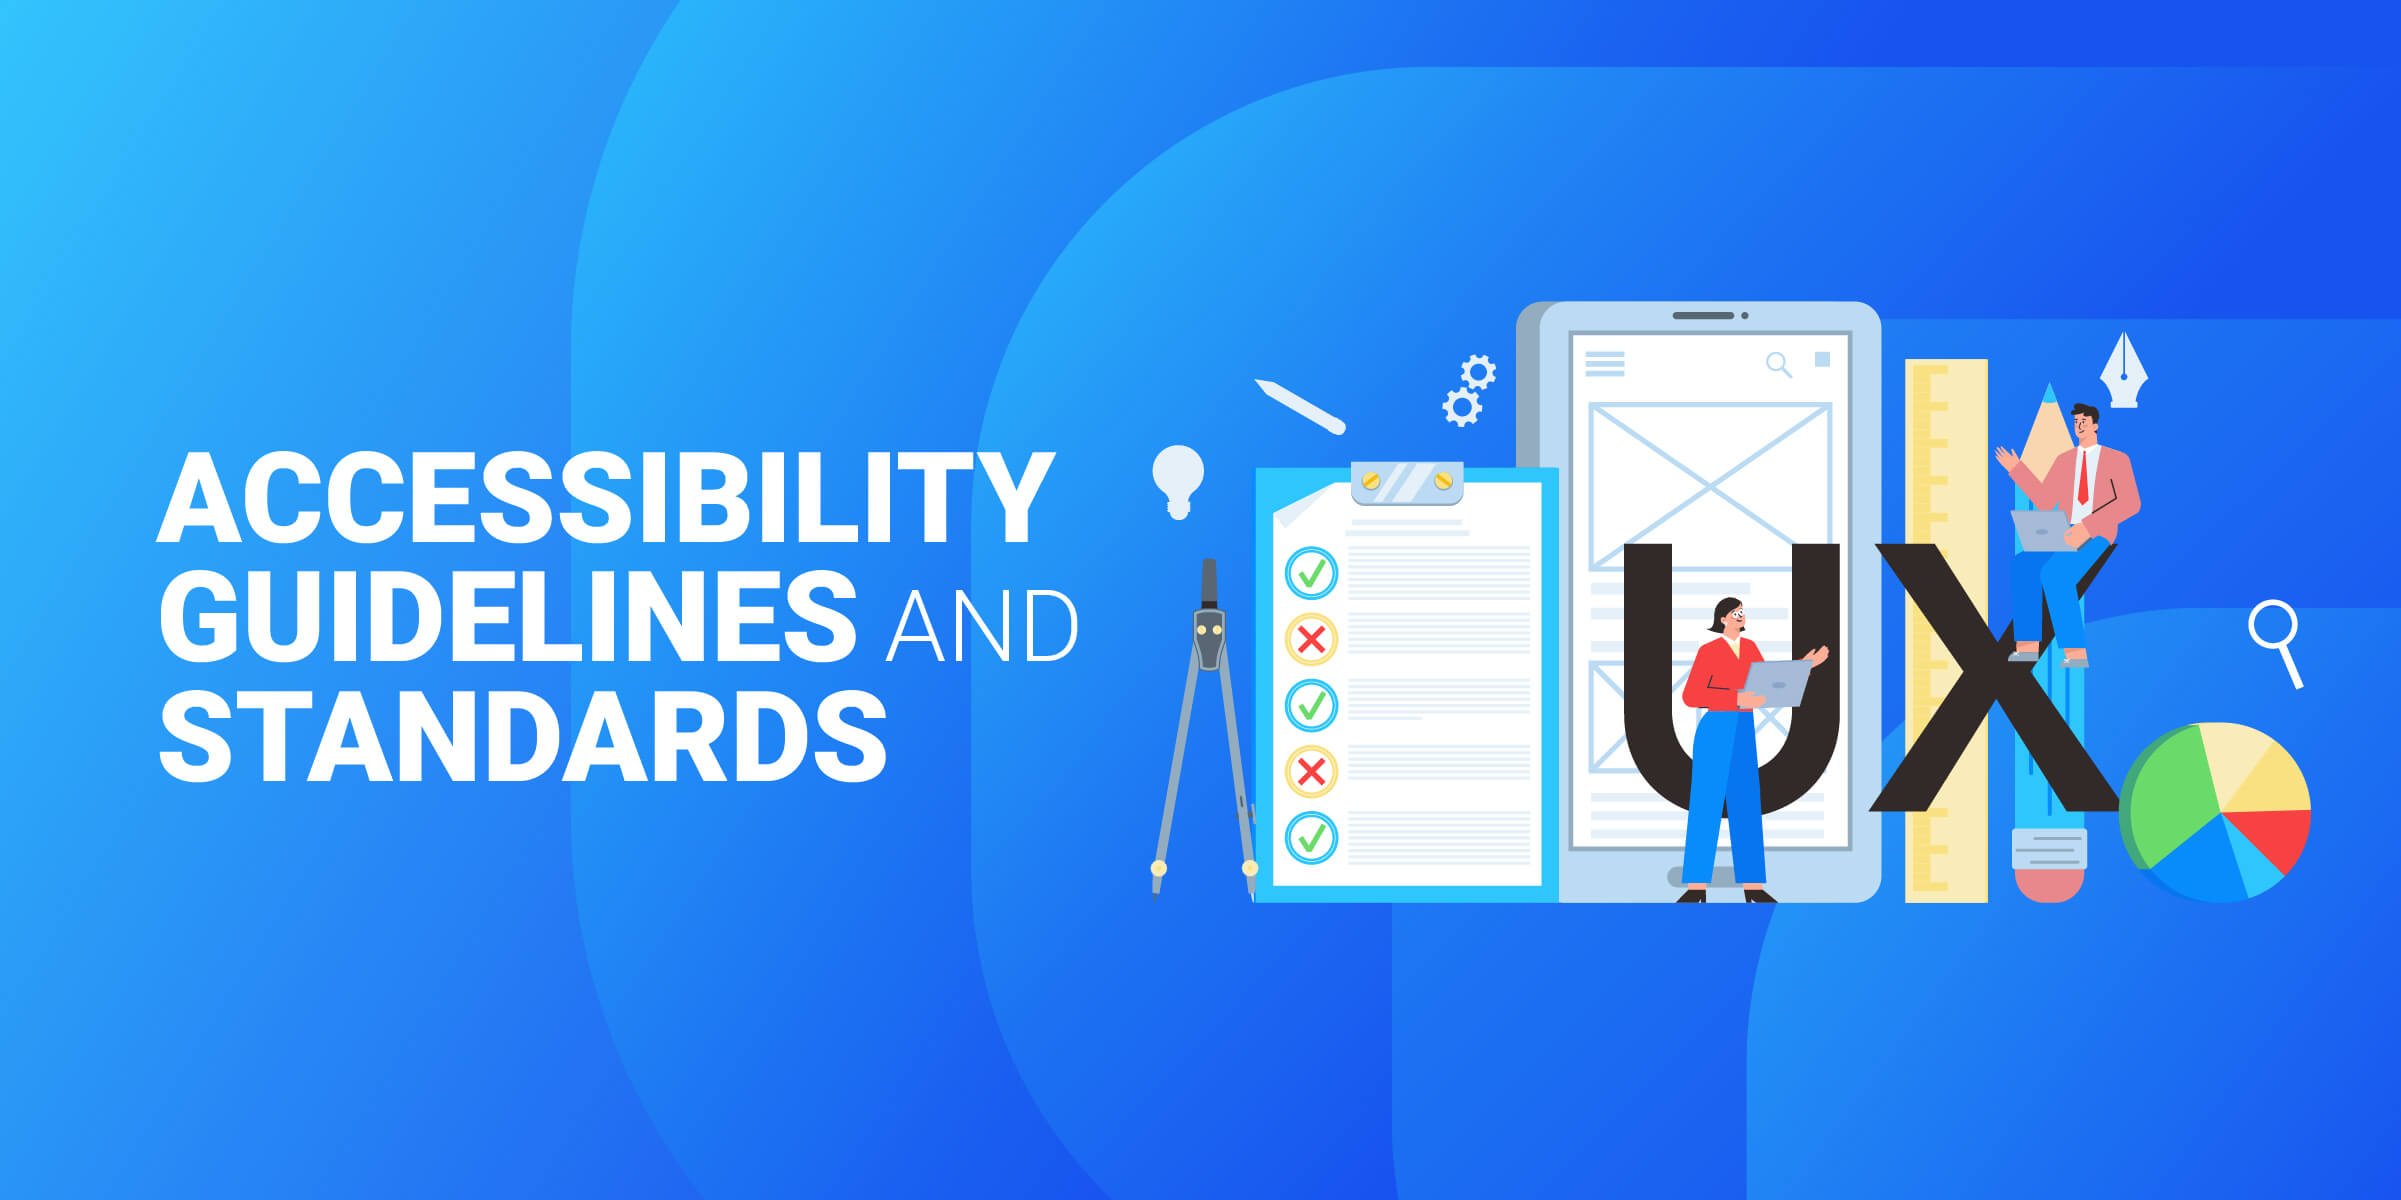 Accesibility Guidelines and Standards